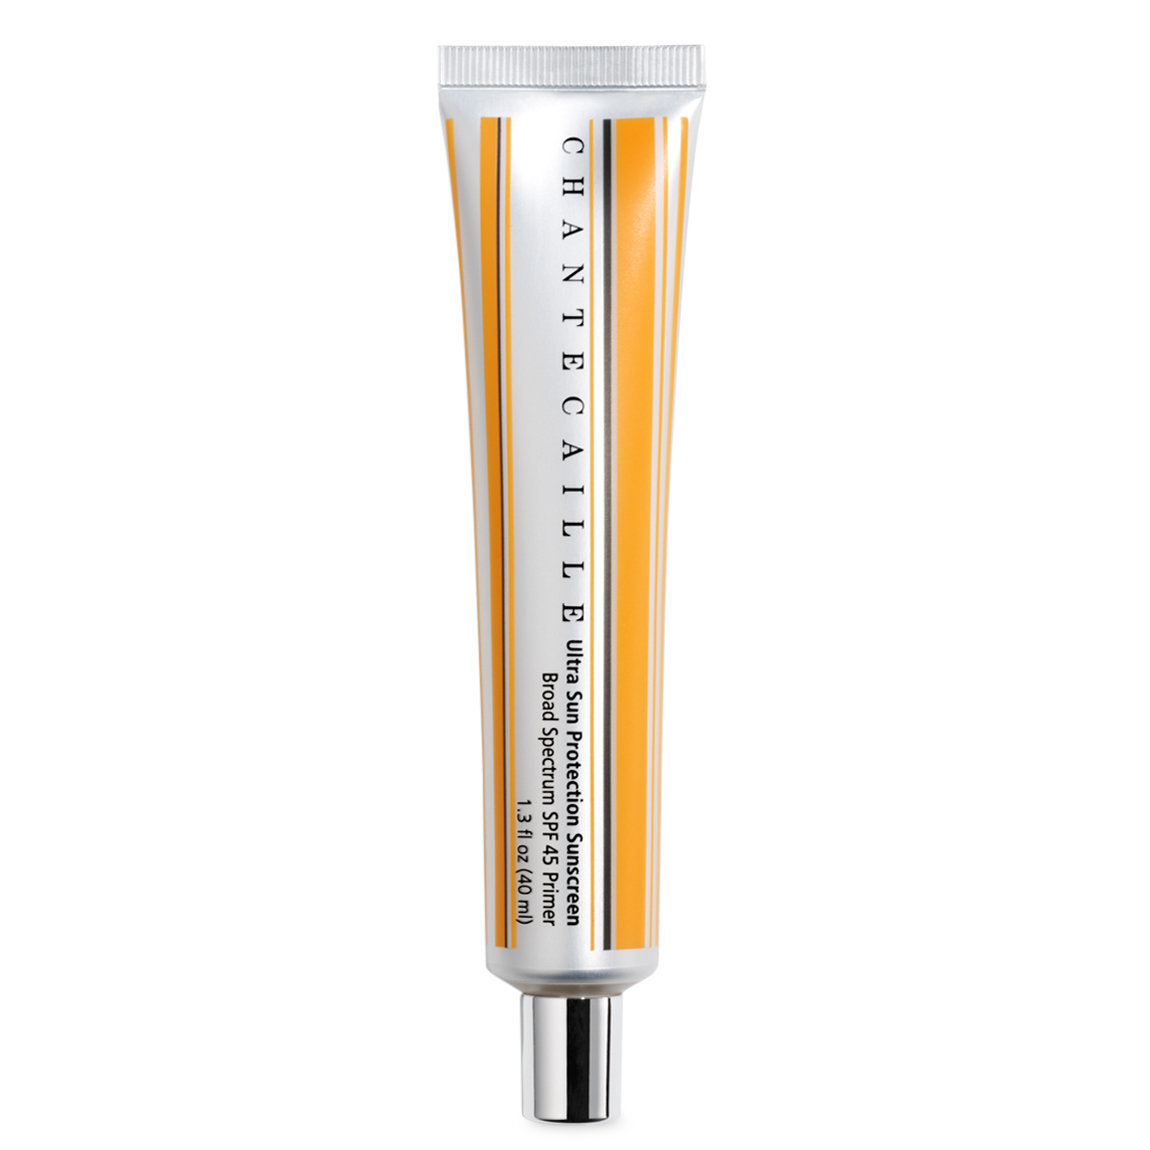 Chantecaille Ultra Sun Protection Broad Spectrum SPF45 alternative view 1 - product swatch.